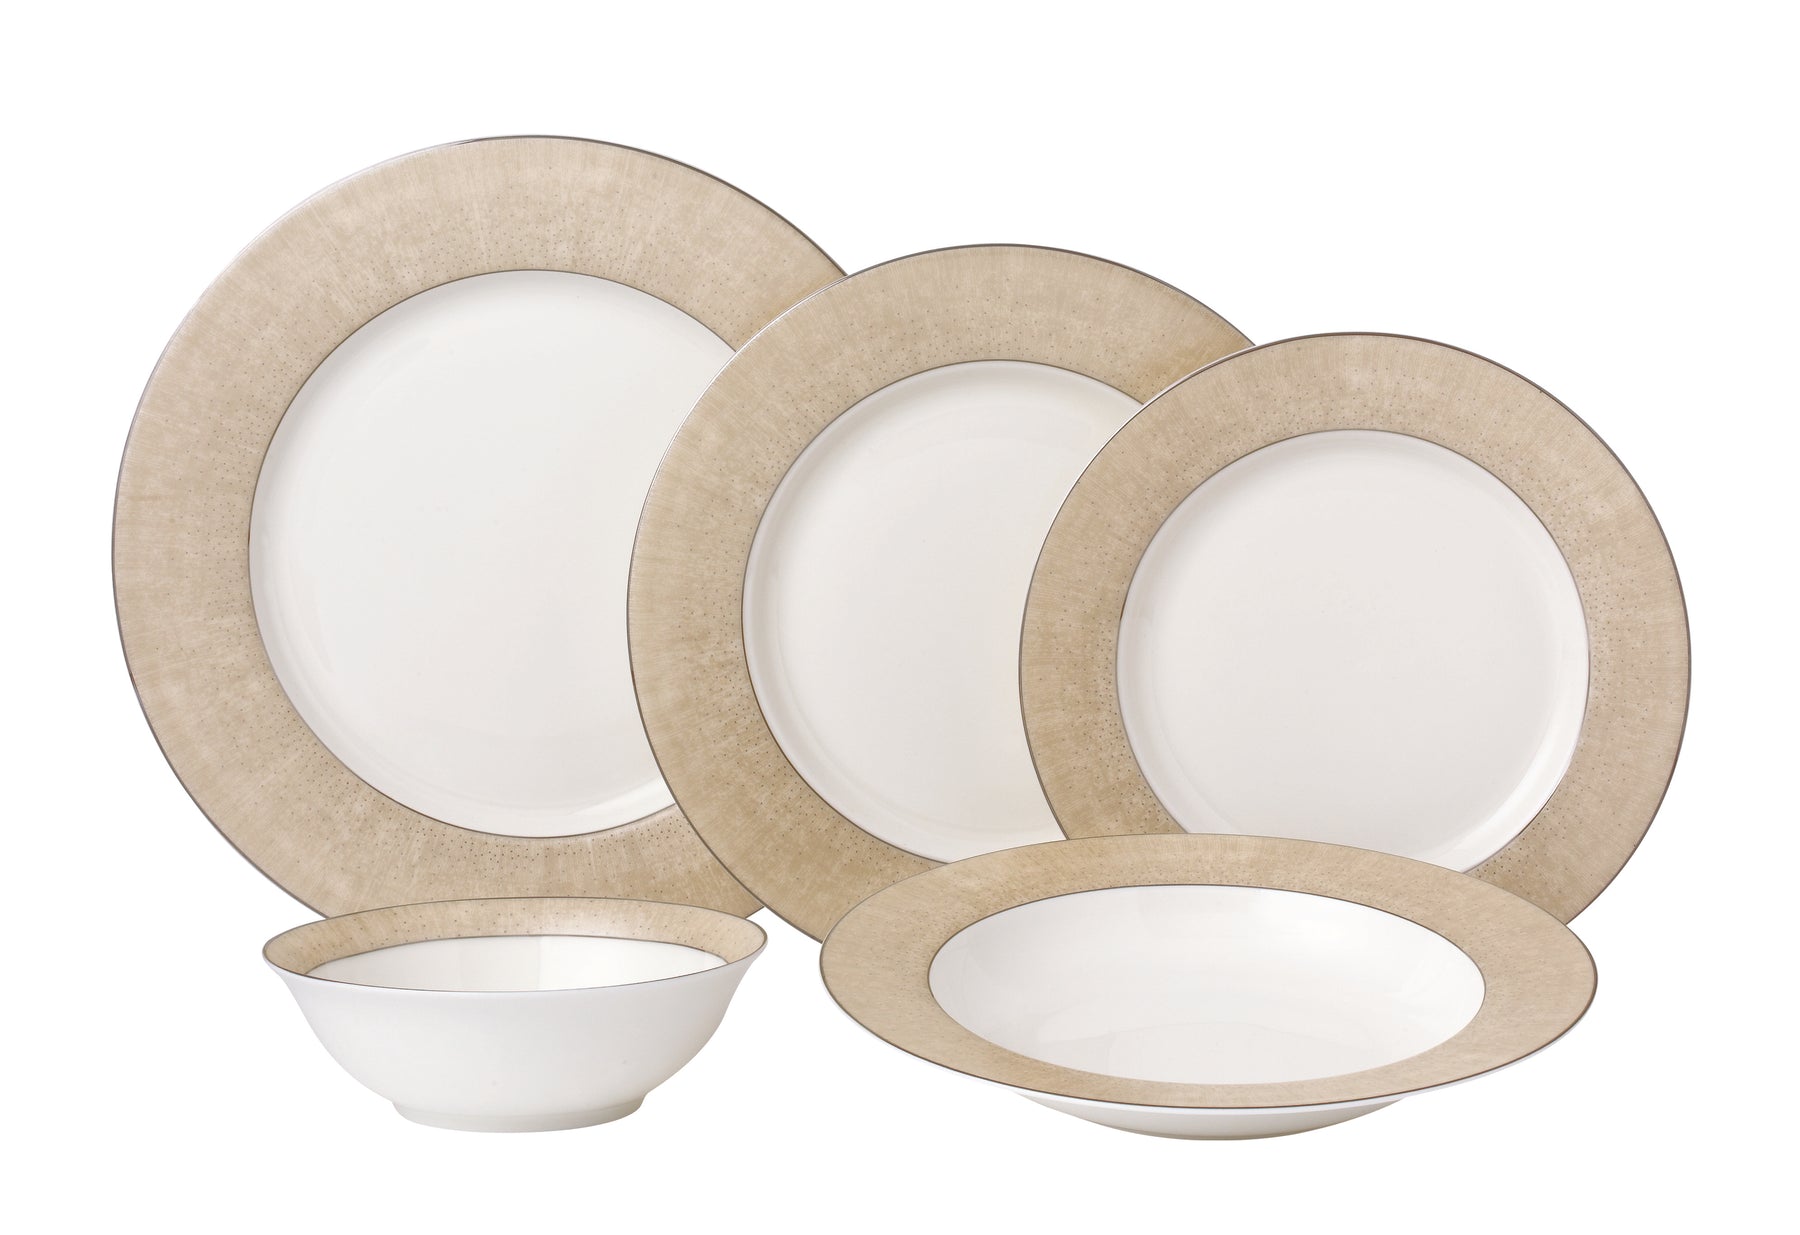 Joseph Sedgh 6480Y-20 20 Piece Dinnerware Set, Marilyn (Big Plate, Small Plate, Salad Plate, Soup Bowl, Compote Bowl)